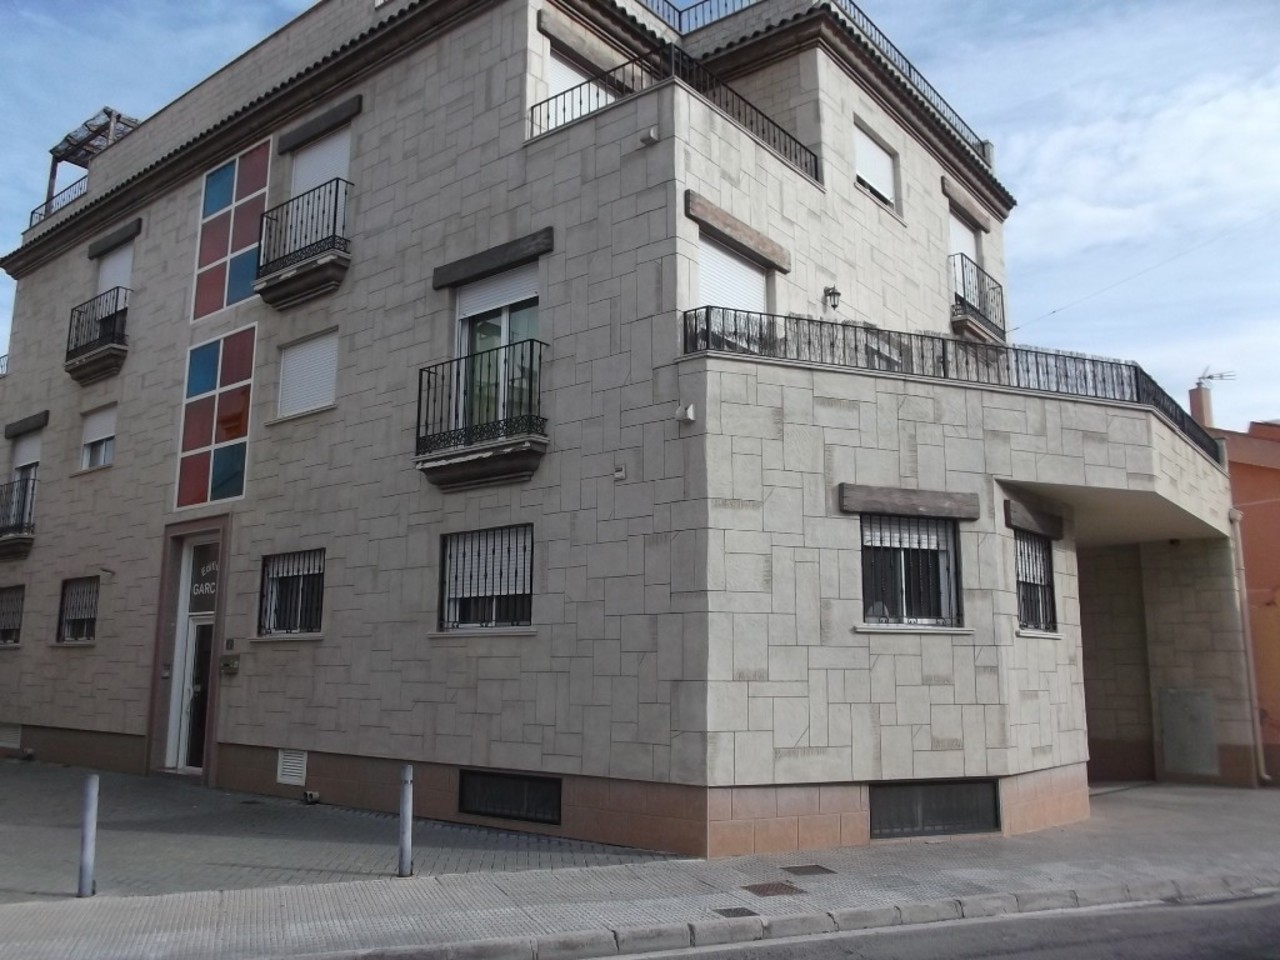 For sale: 2 bedroom apartment / flat in Rojales